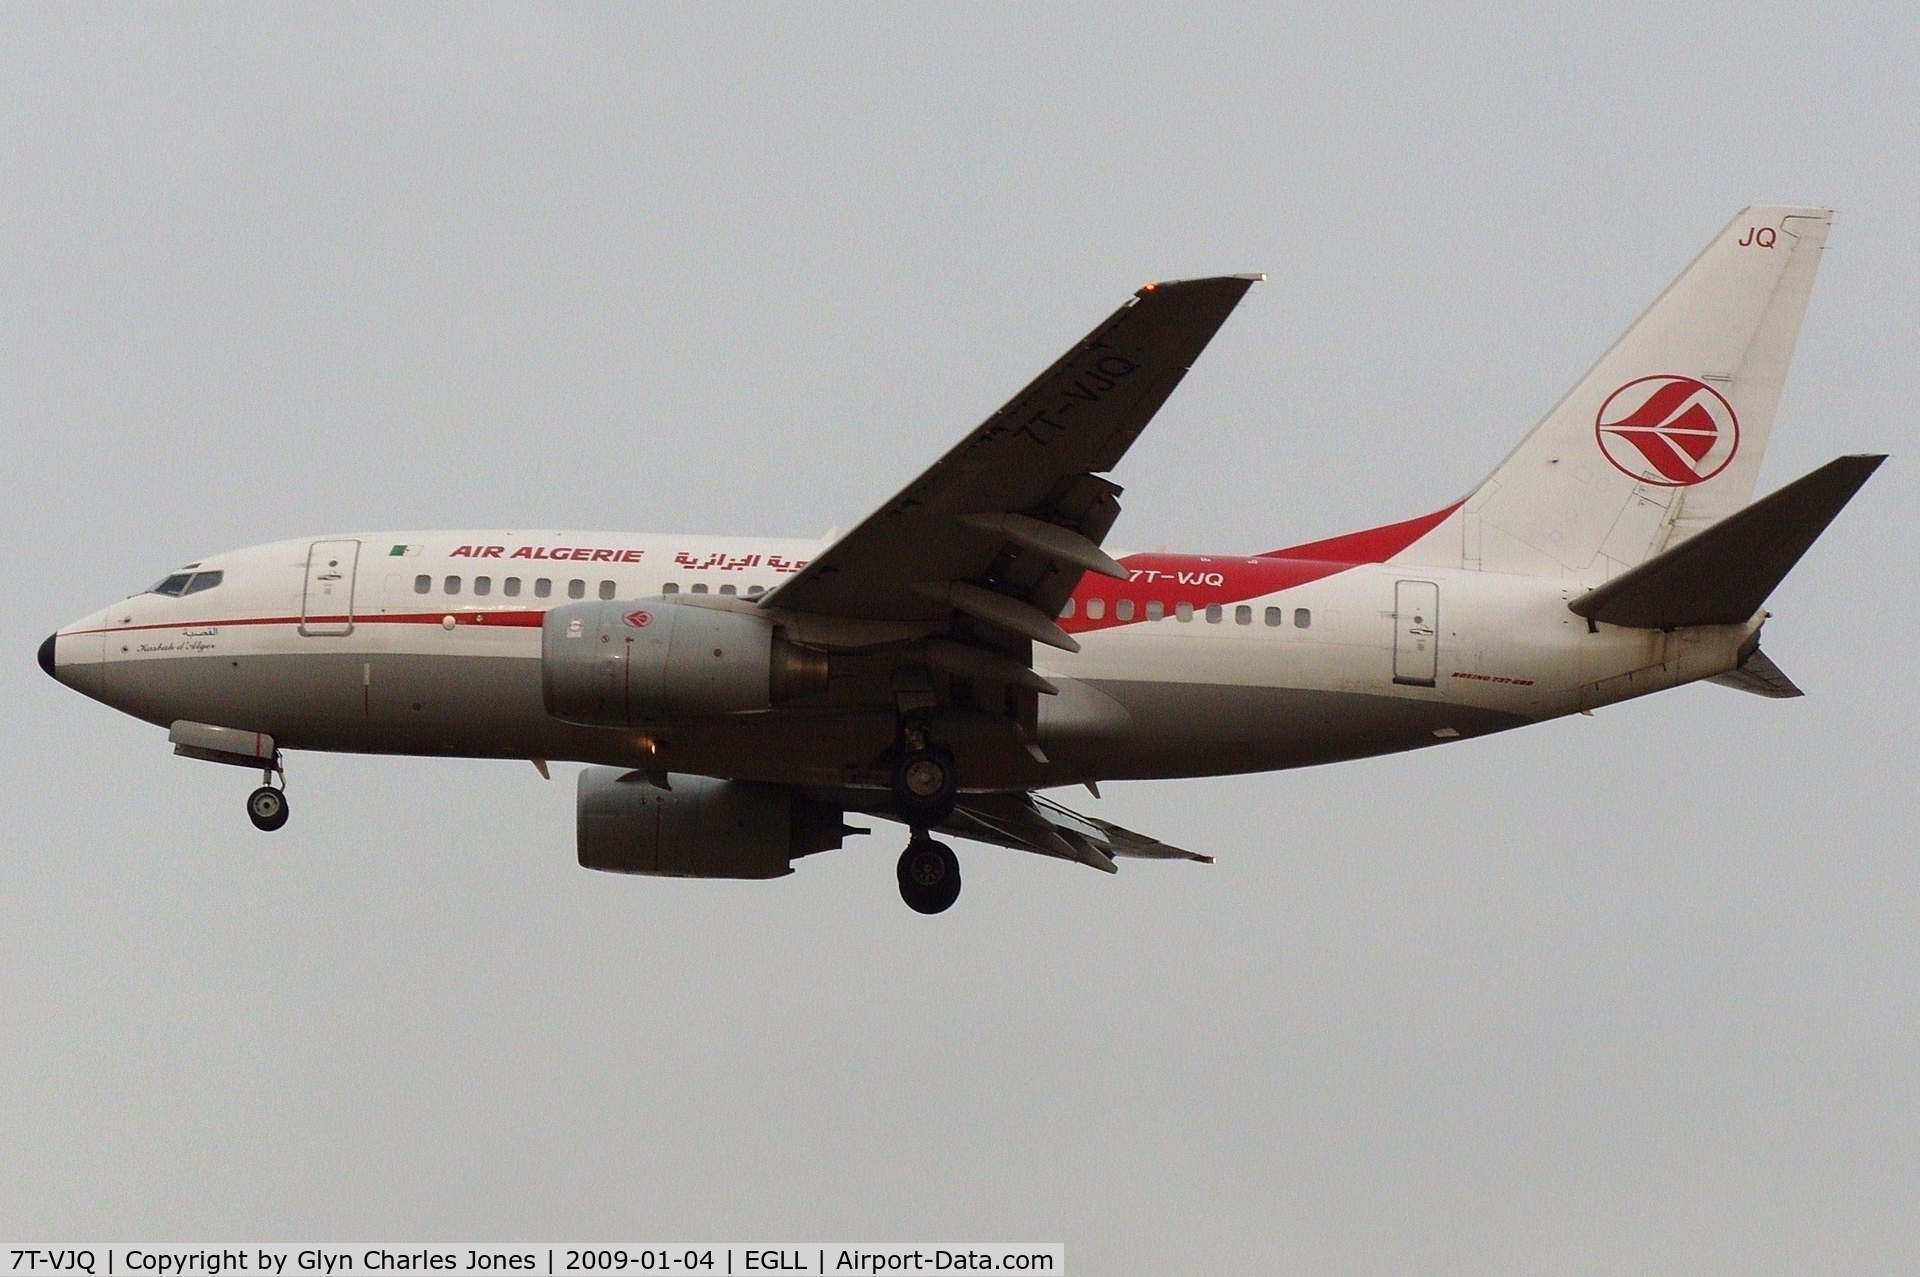 7T-VJQ, 2002 Boeing 737-6D6 C/N 30209, 'Kasbah d'Alger' on finals to runway 27L. Operated by Air Algérie.